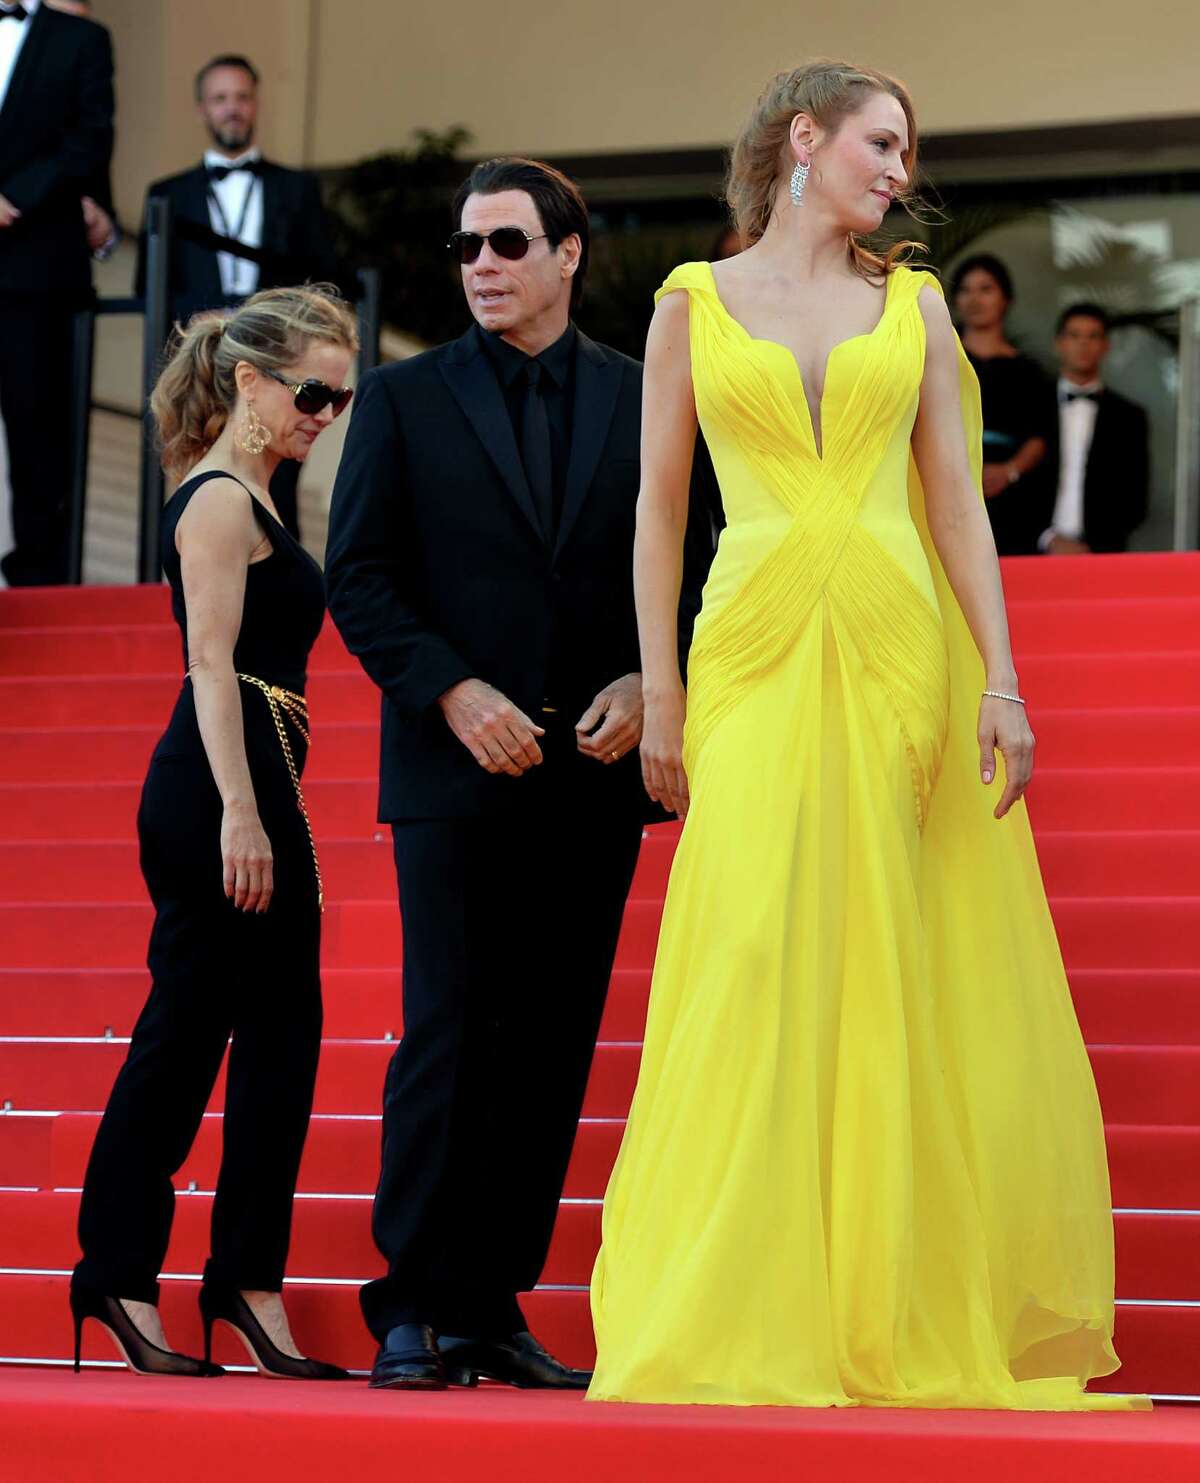 (L to R) US actress Kelly Preston, US actor John Travolta and US actress Uma Thurman attend "Sils Maria" (Clouds of Sils Maria) film screening in competition during the 67th Cannes Film Festival in Cannes, France. May 23, 2014. (Photo by Mustafa Yalcin/Anadolu Agency/Getty Images)Related stories:     Turkish drama 'Winter Sleep' wins Palme d'Or     PHOTO GALLERY: Cannes' fashion highs